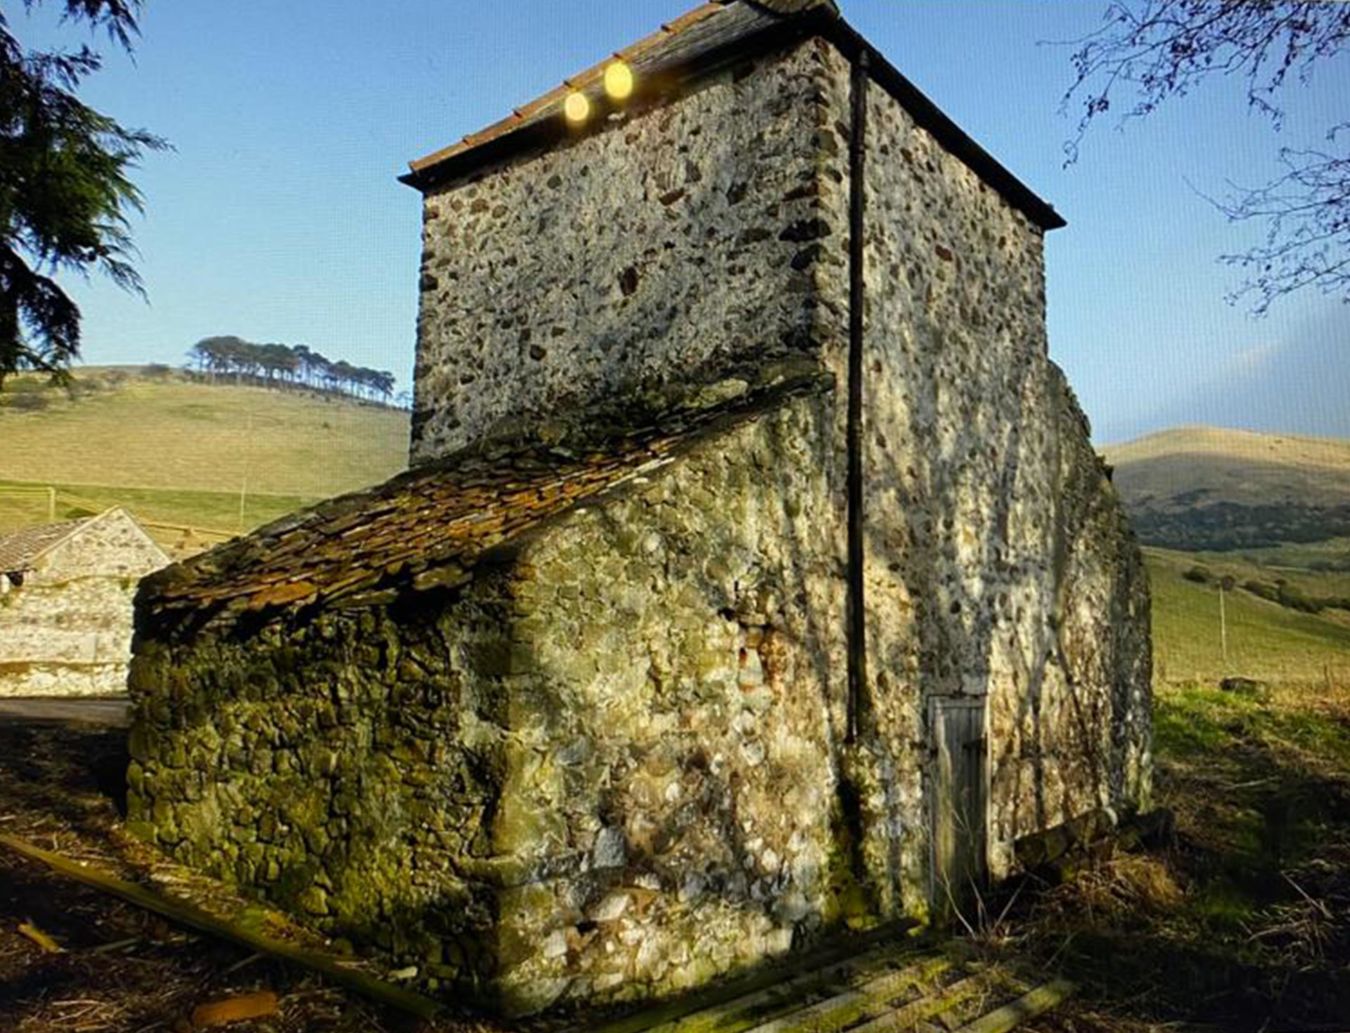 Side view of the Dovecot at Reedsford before building work begins in 2022